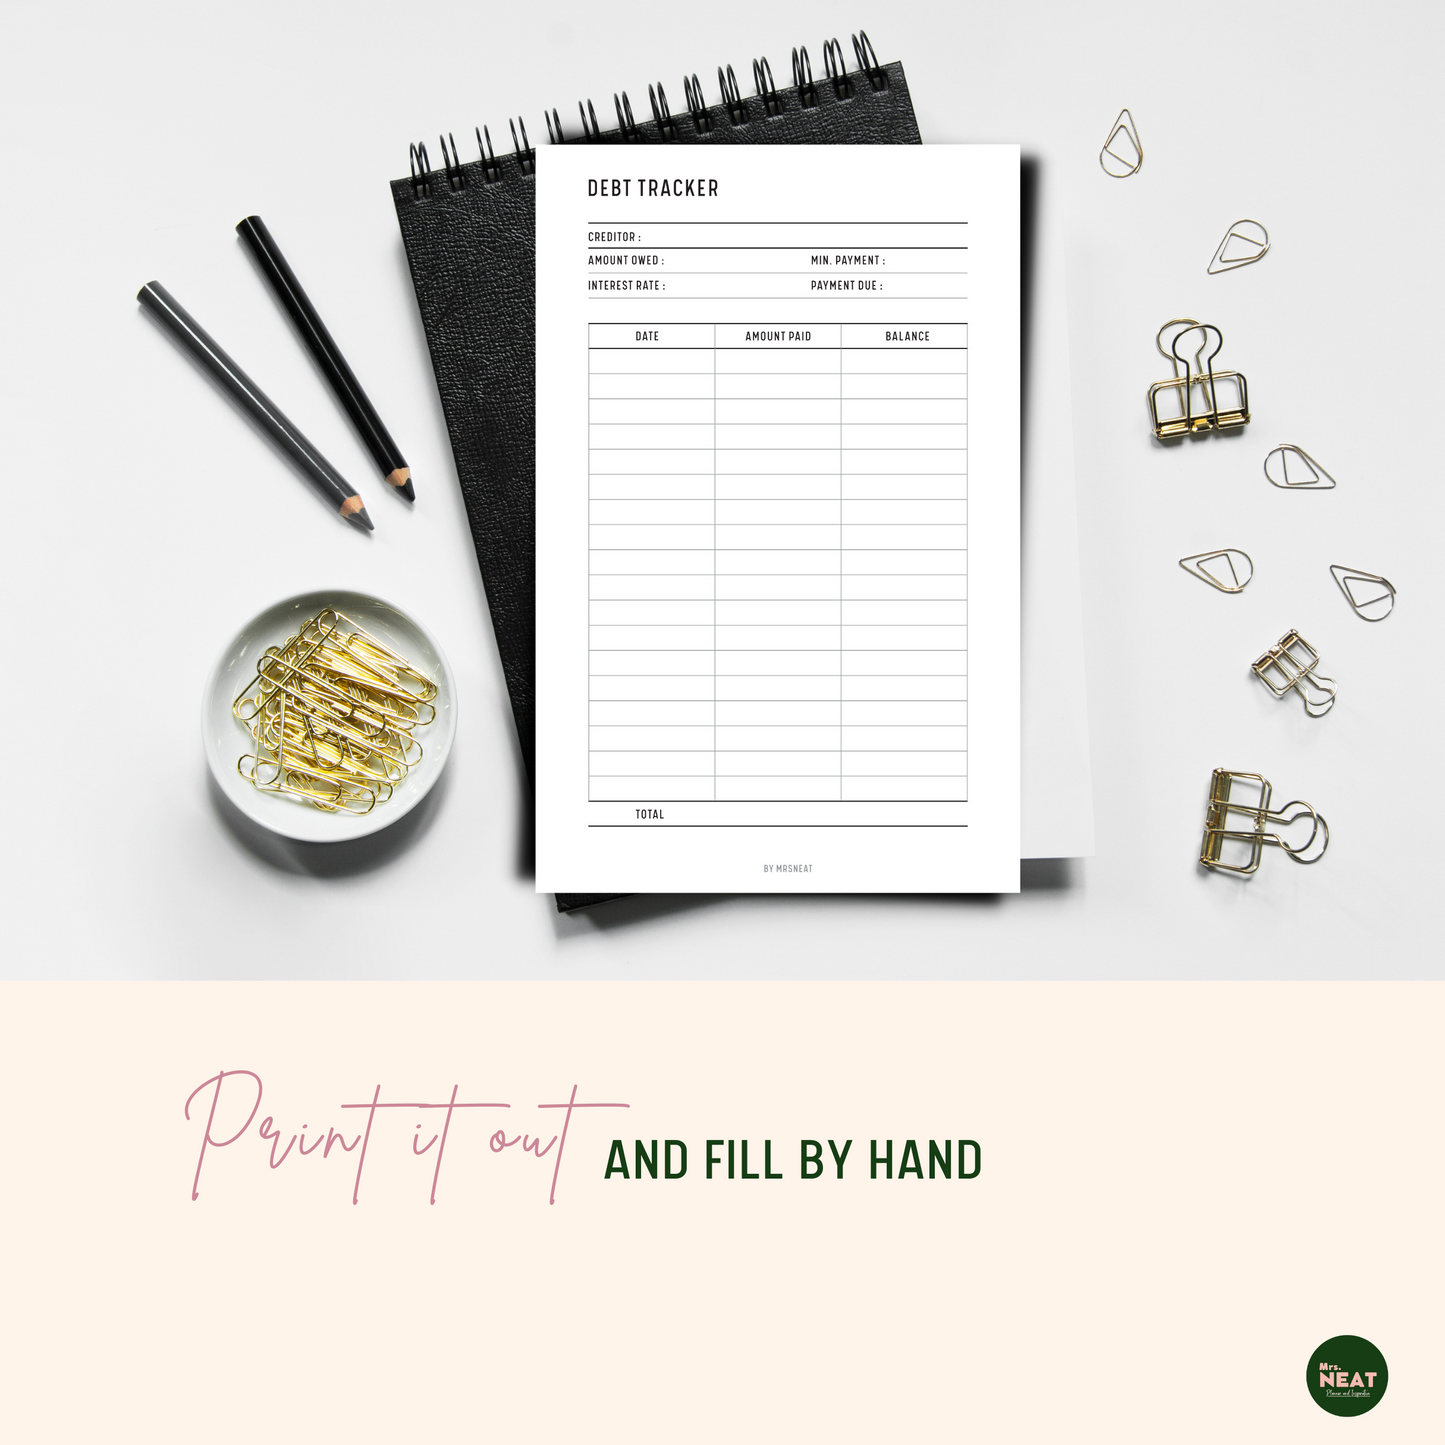 Minimalist Debt Payment Tracker Planner Printable printed out and put on the black book